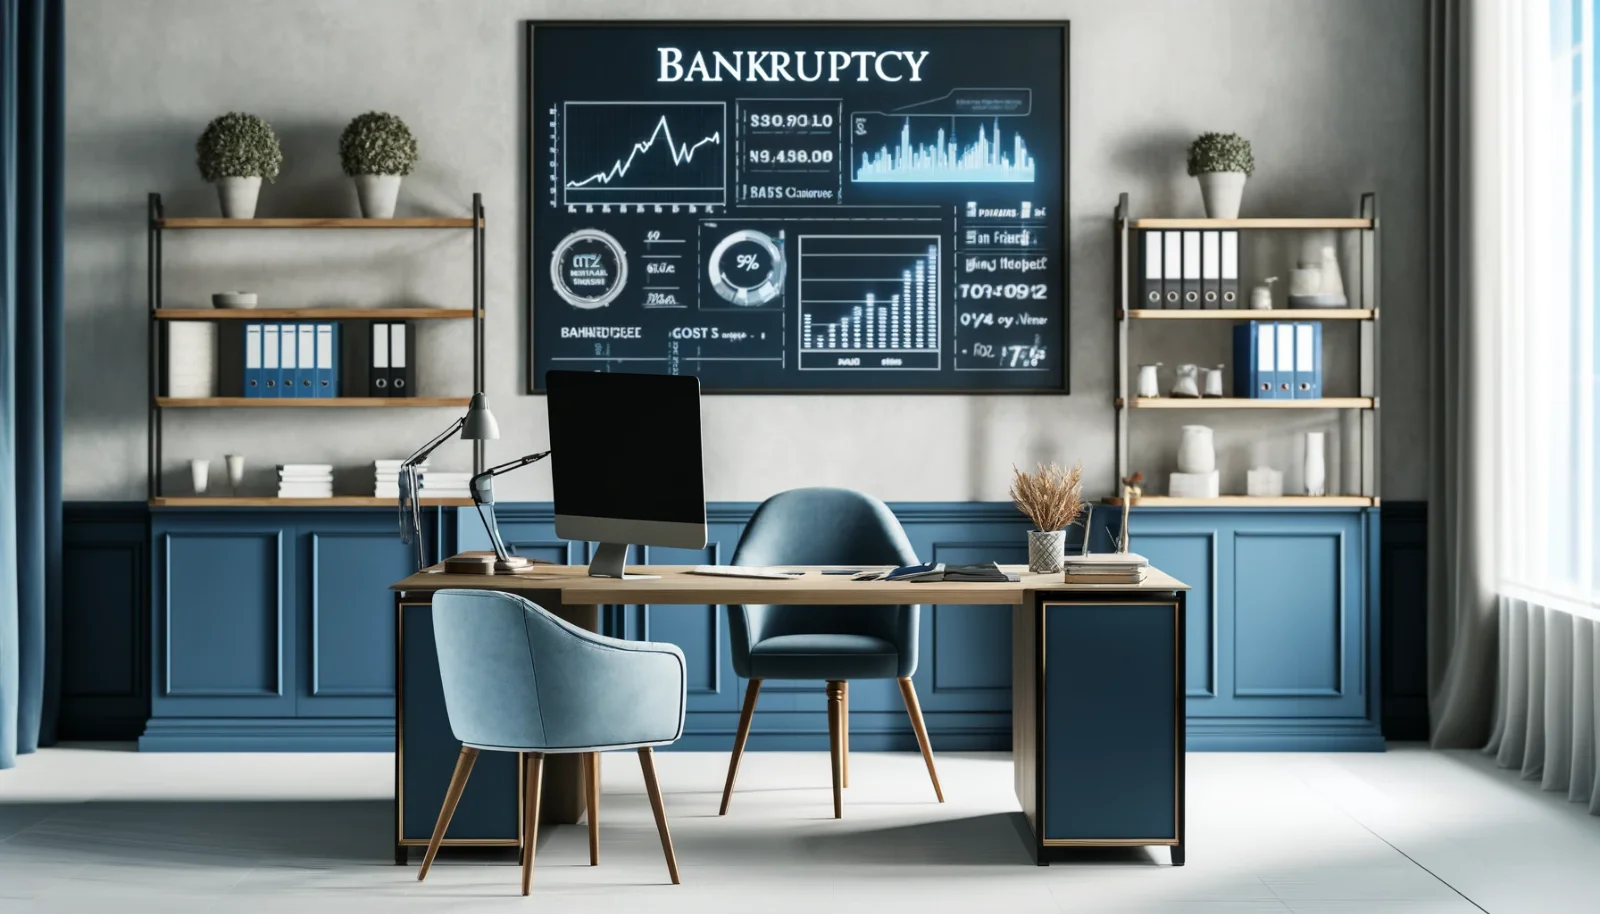 Bankruptcy Mortgage